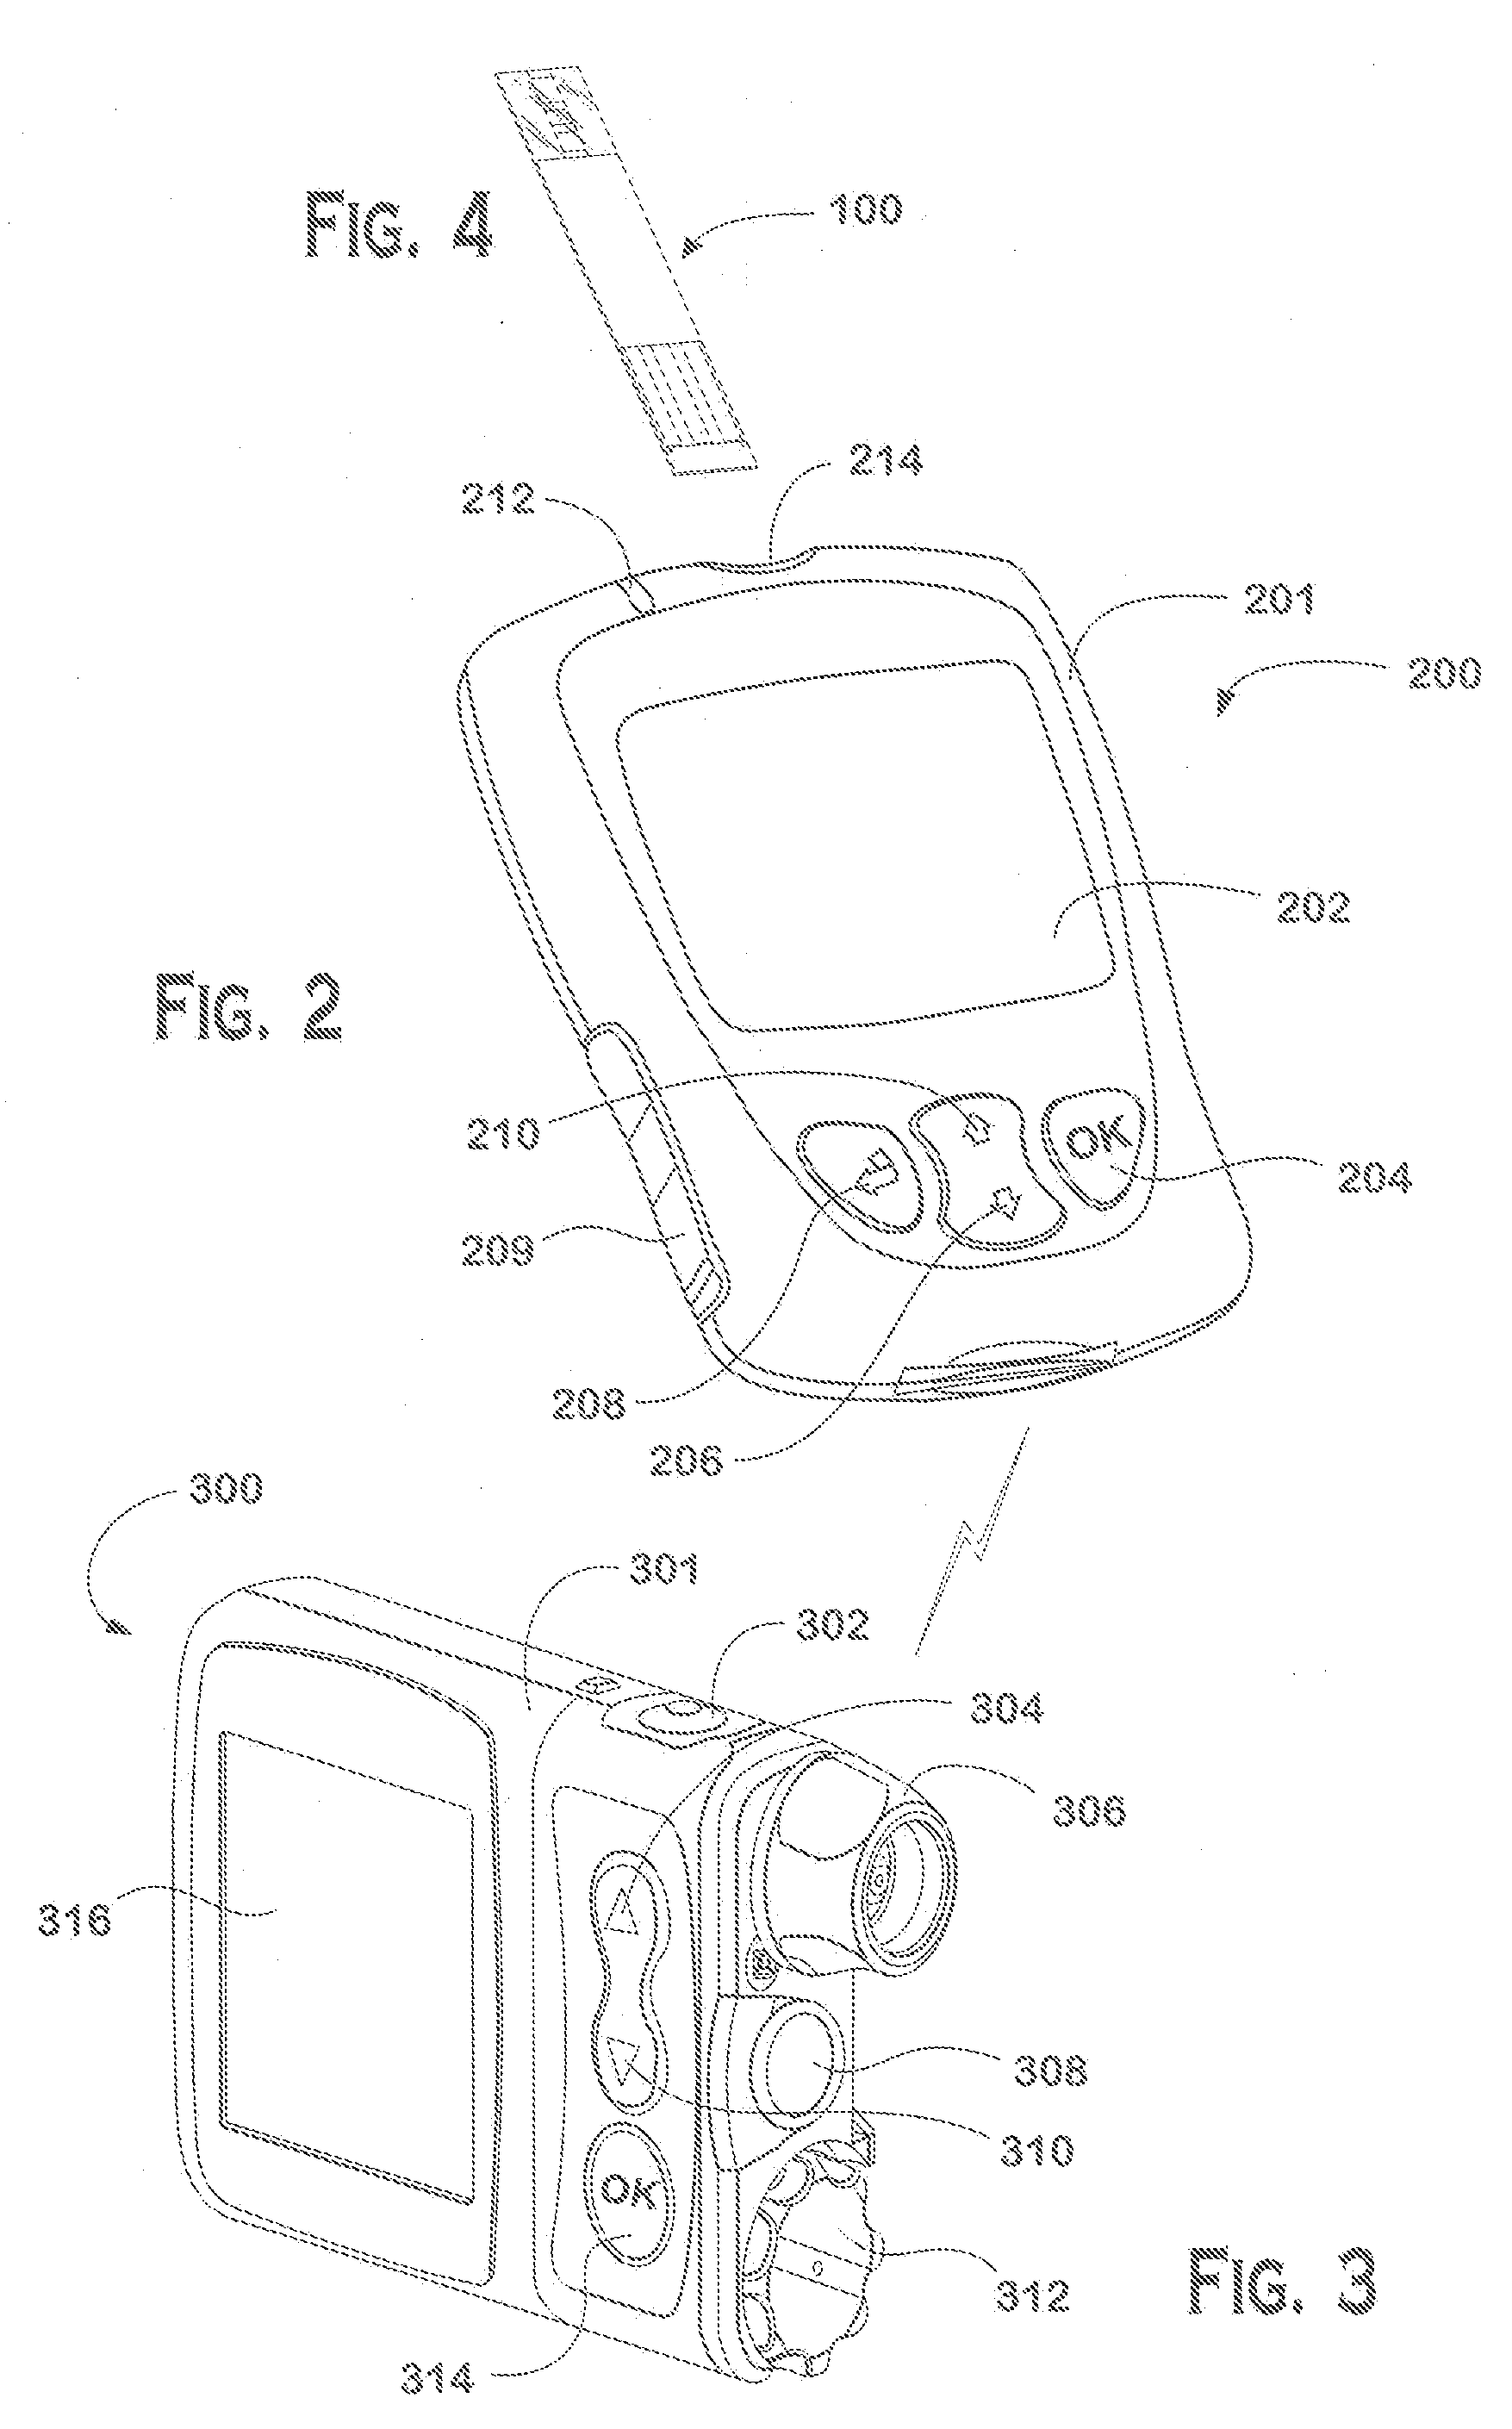 Systems and methods to pair a medical device and a remote controller for such medical device